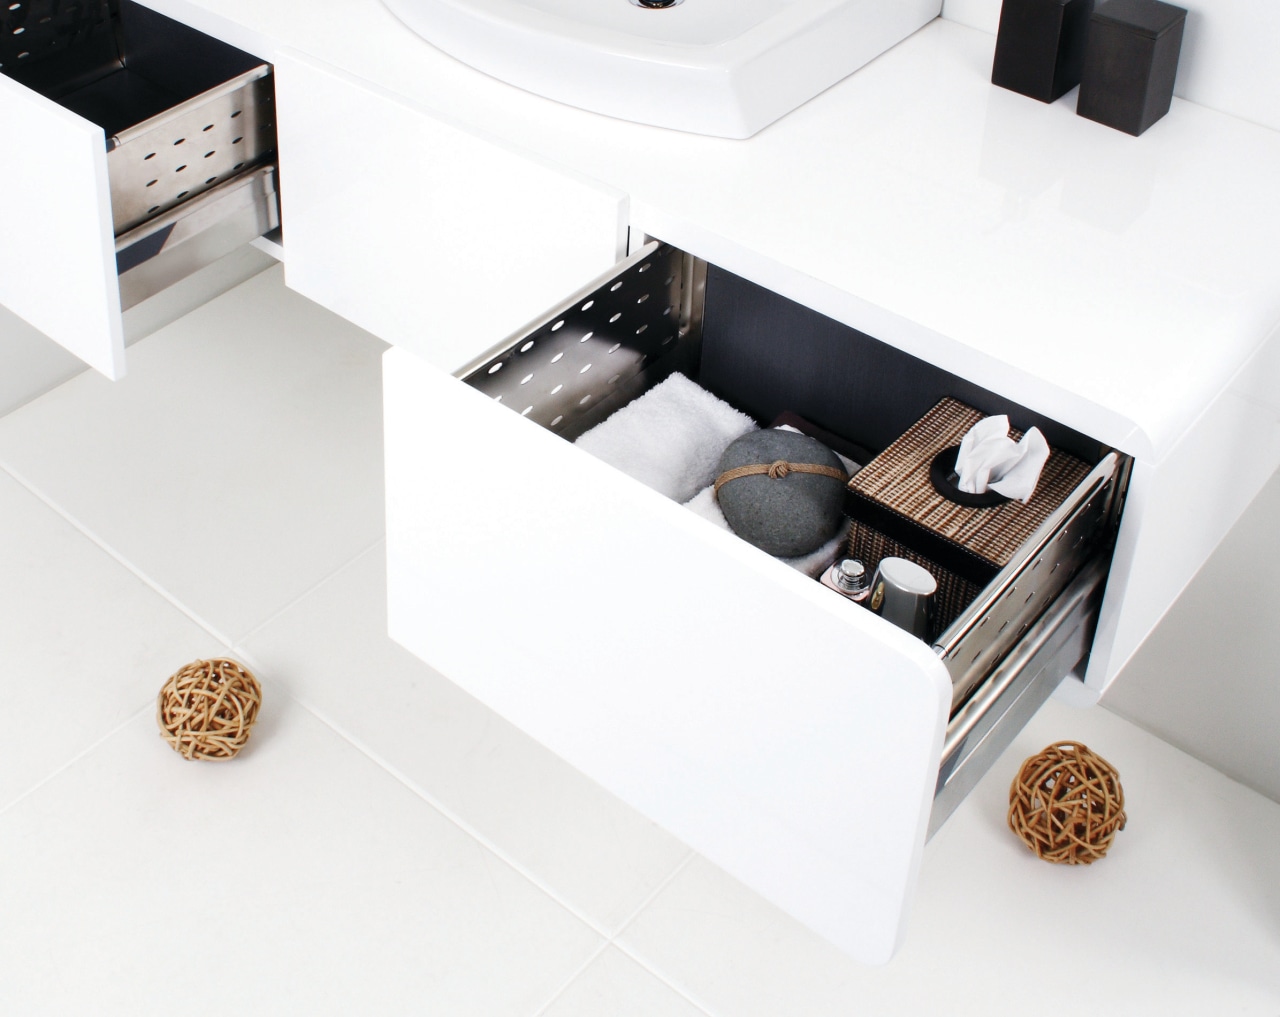 The simplicity range includes strong, smooth-gliding mechanisms and box, furniture, product, product design, table, white